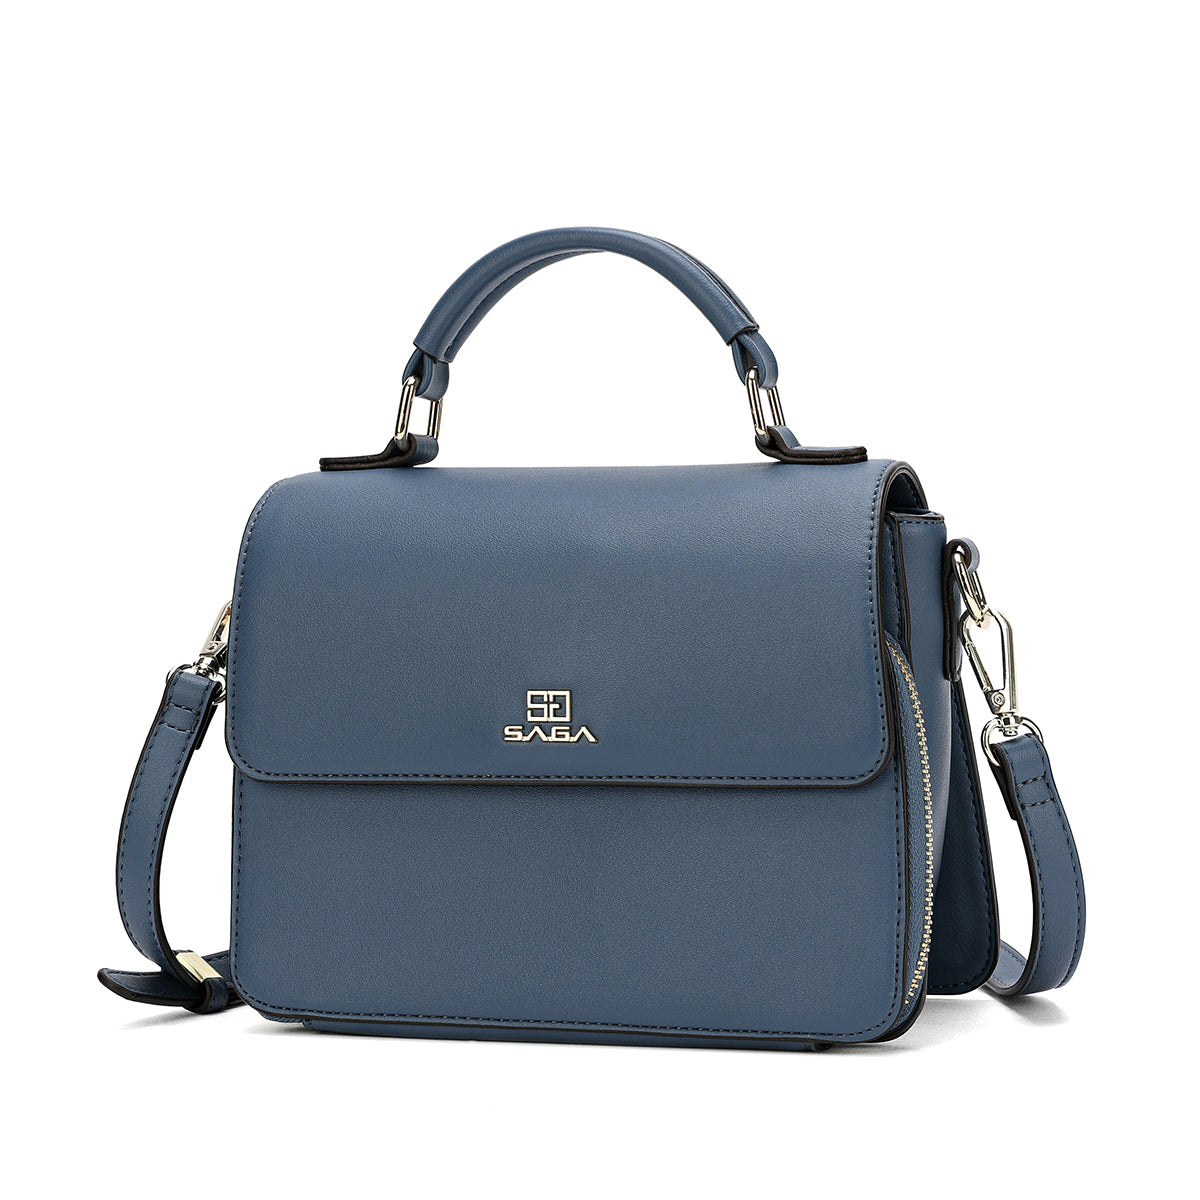 Saga Women's Handbag with Detachable Strap 20.5cm Wide Available in Two Colors